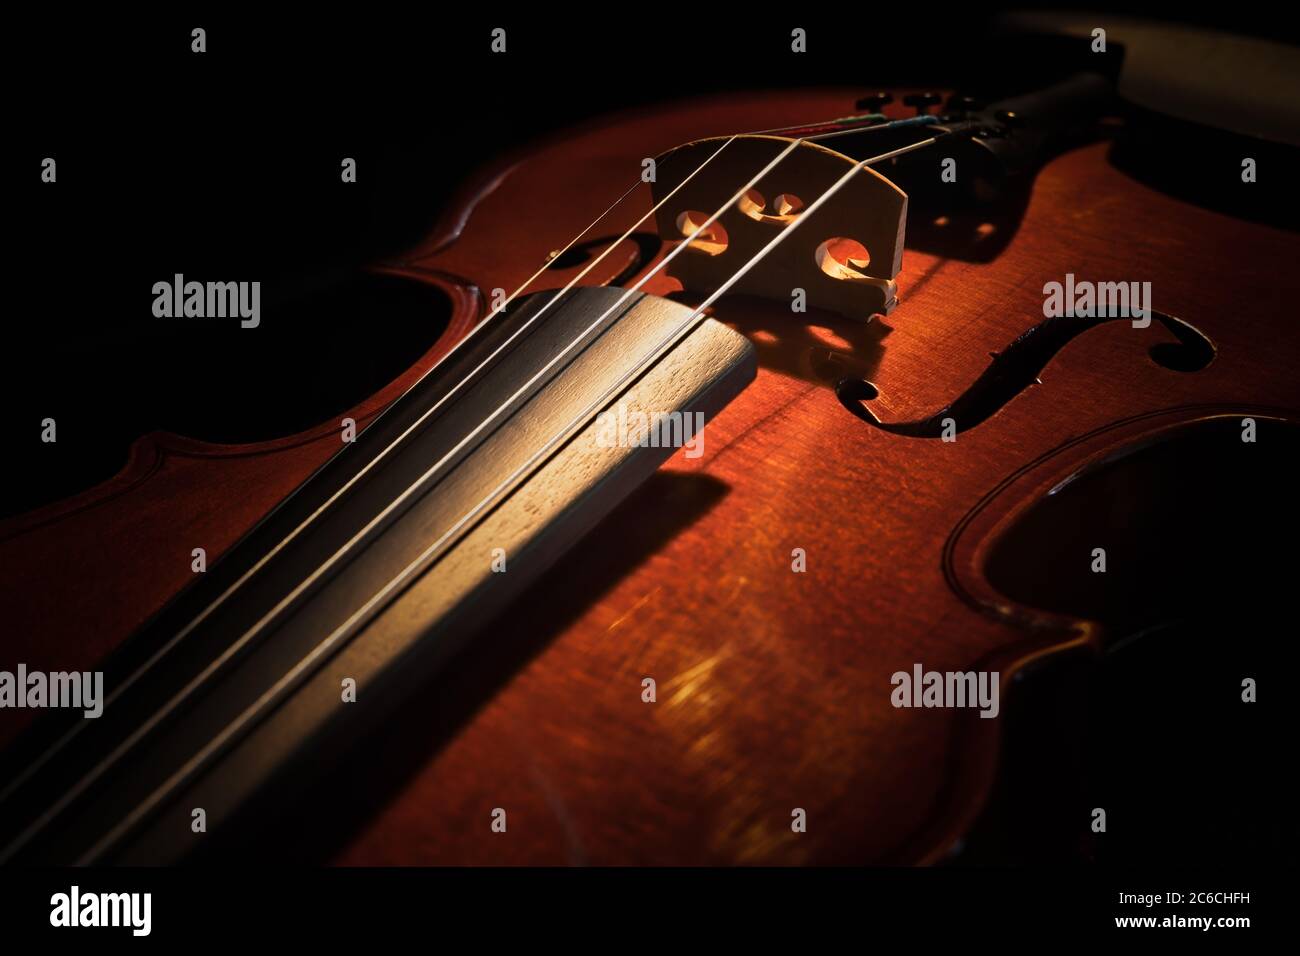 A violin sitting on a chair with soft lighting. Stock Photo